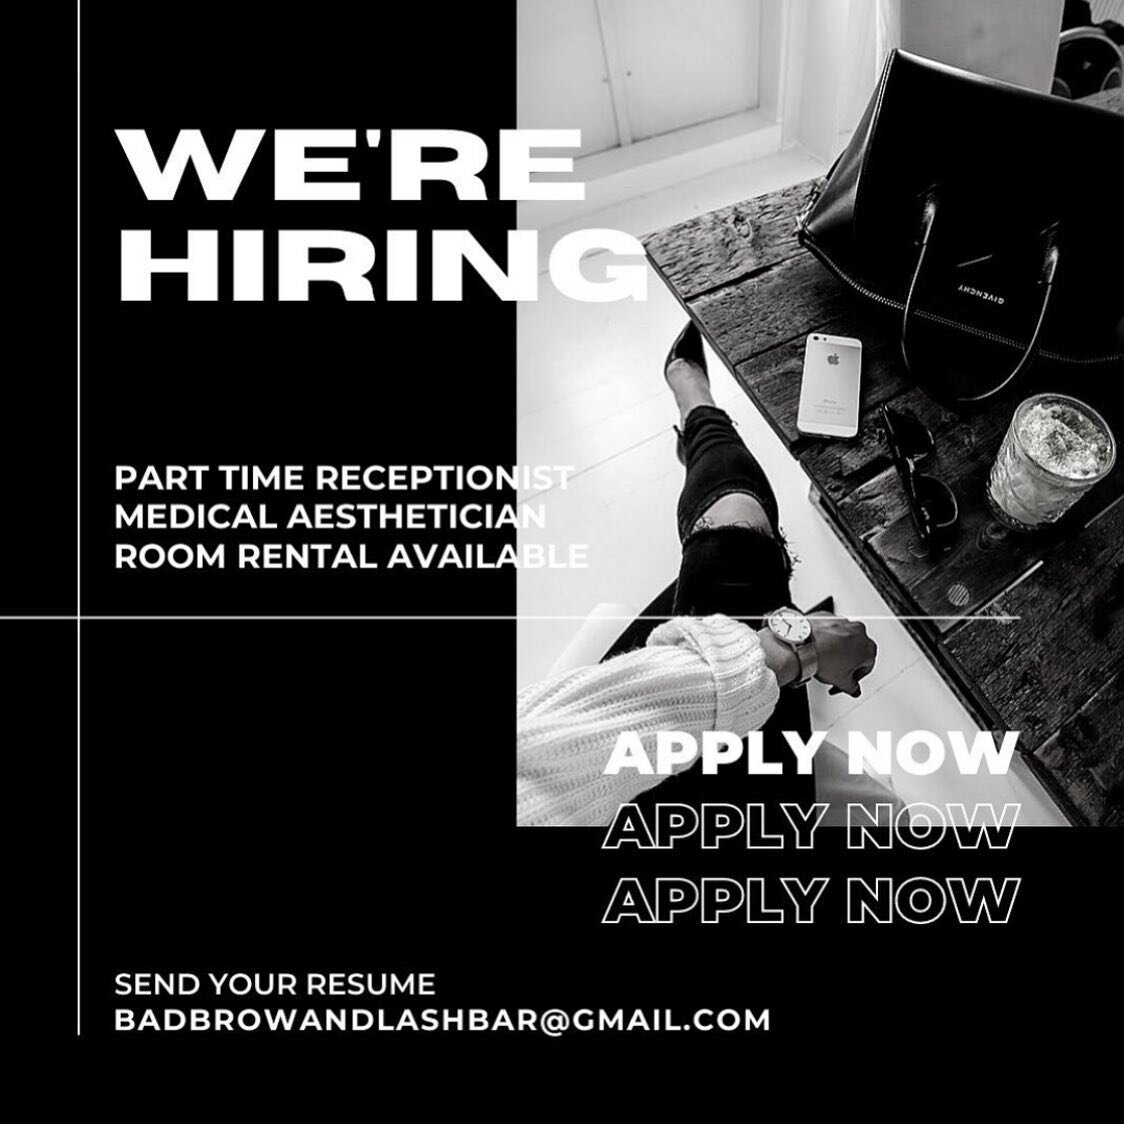 We&rsquo;re Growing! 

Expanding our team and we have 2 positions available.

Medical Aesthetician

&bull; Laser knowledge or willing to be trained
&bull; Diploma in medical aesthetics or esthetics 
&bull; Experience with laser, chemical peels, derma